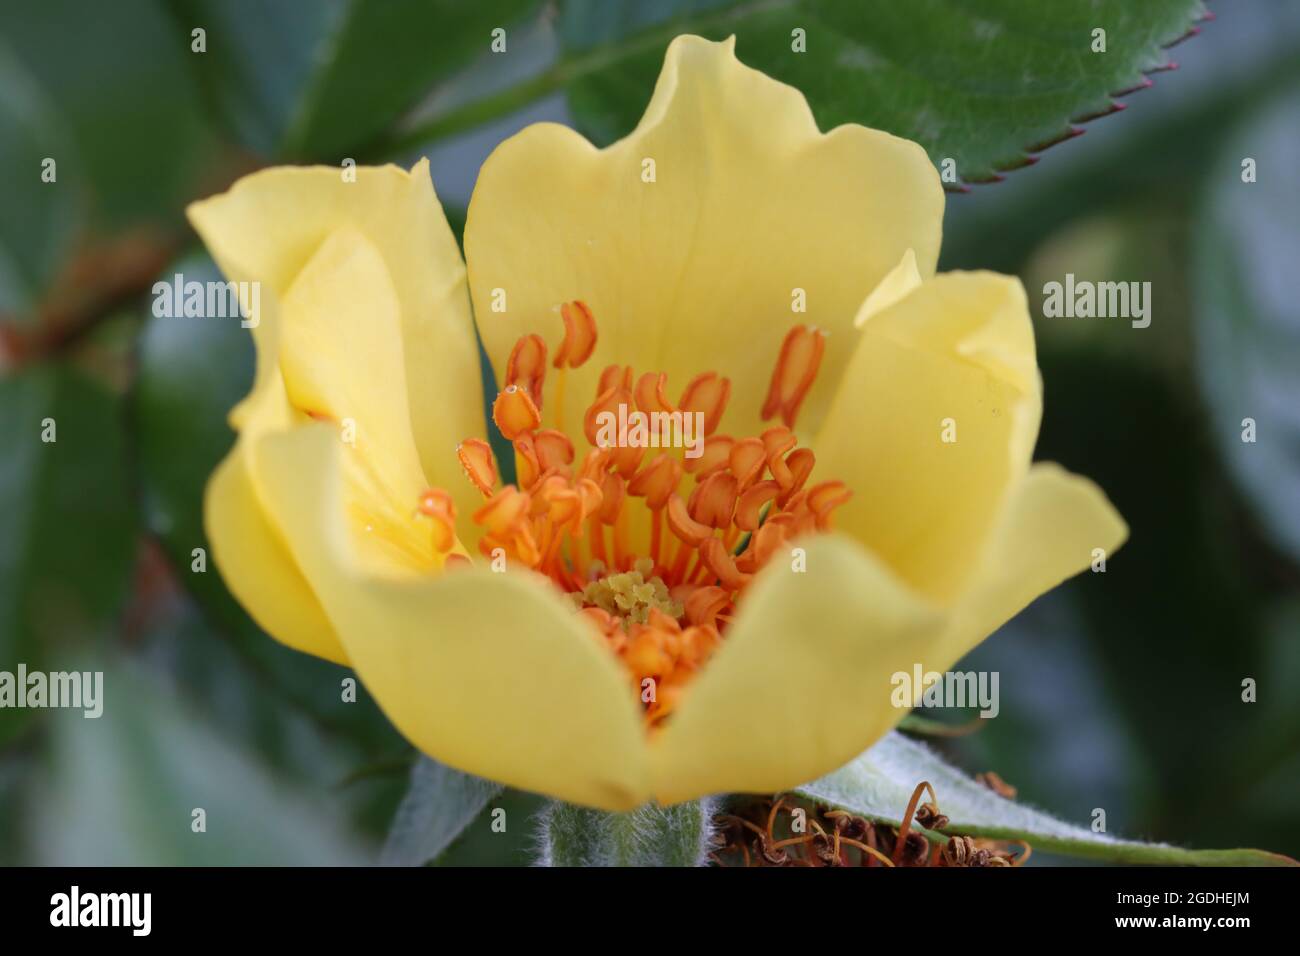 a yellow blossom of the Persian rose `Ducat Mella´ as a close-up Stock Photo